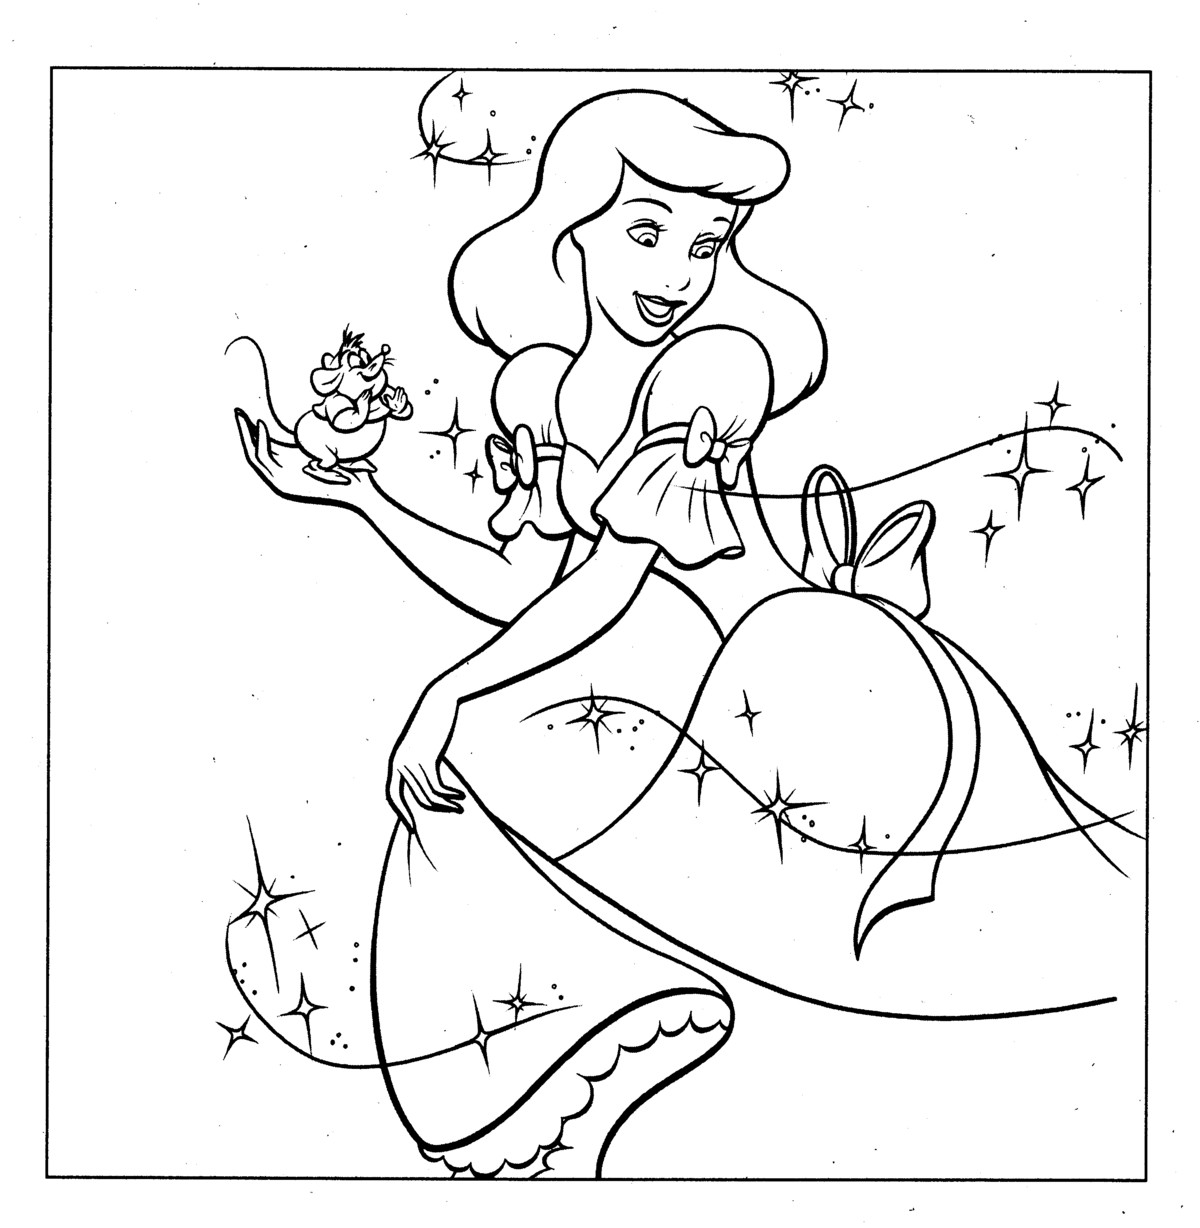 Download cinderella coloring page | Minister Coloring